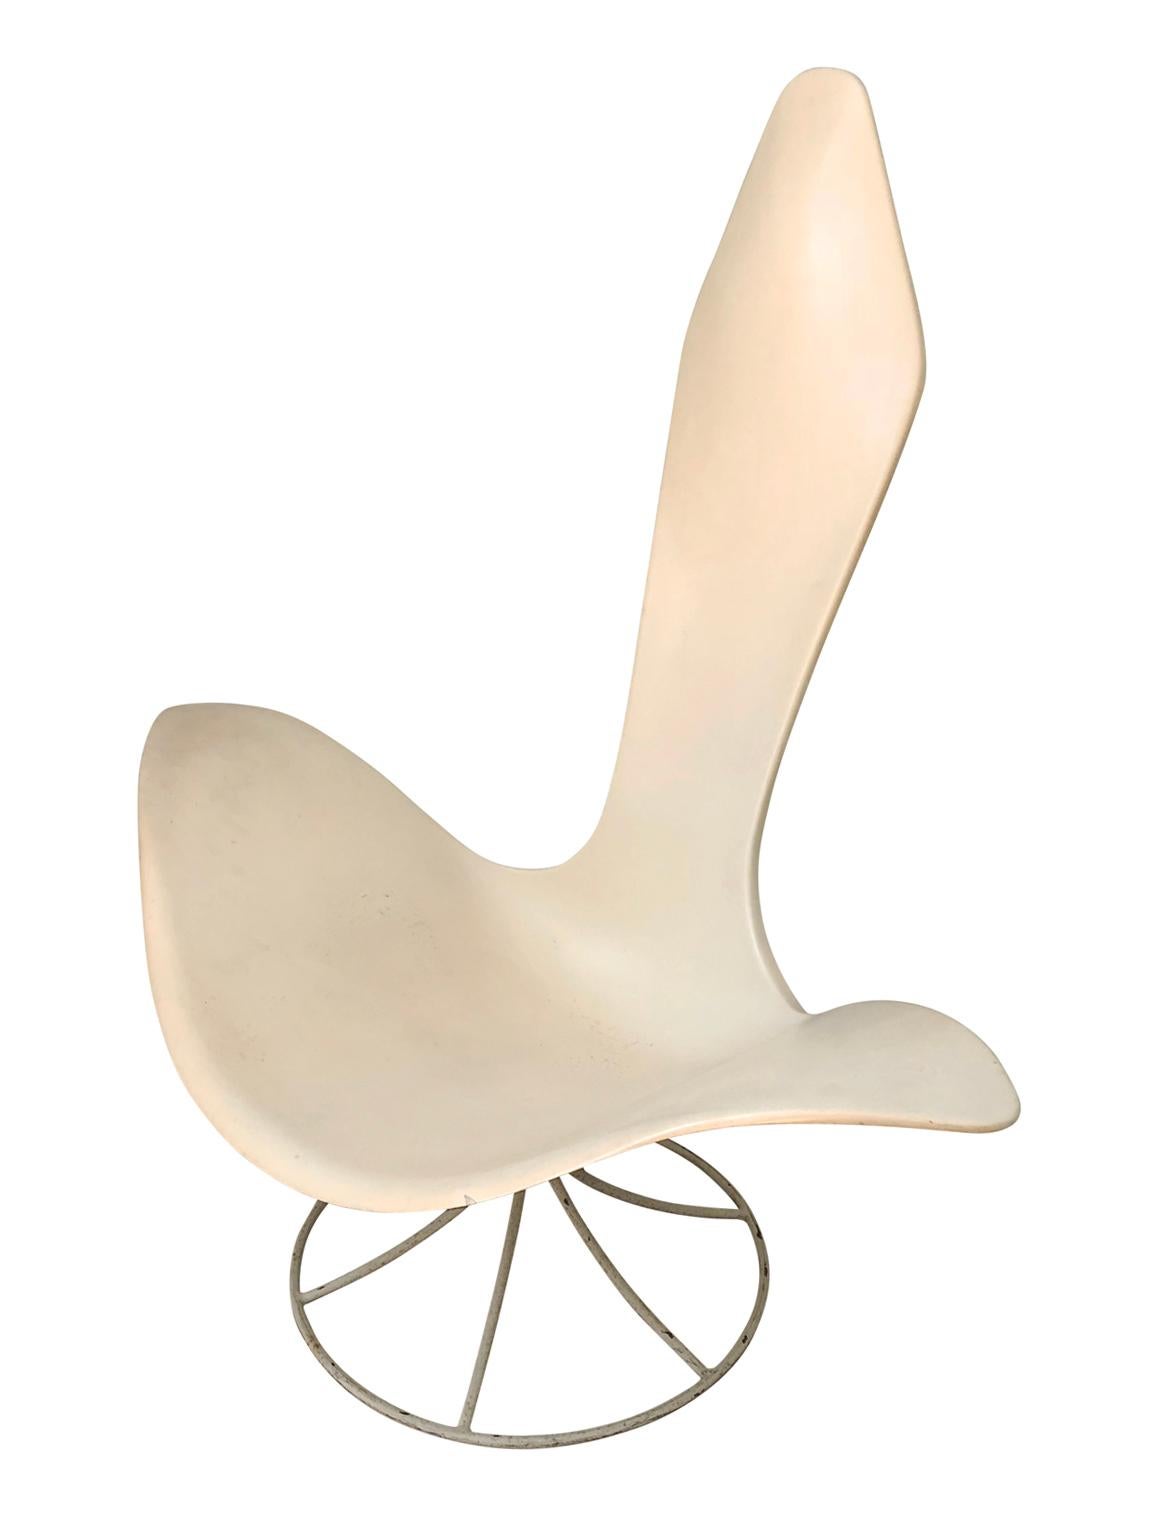 Mid-20th Century Mid-Century Modern White Sculptural Tulip Lounge by Estelle and Erwine Laverne